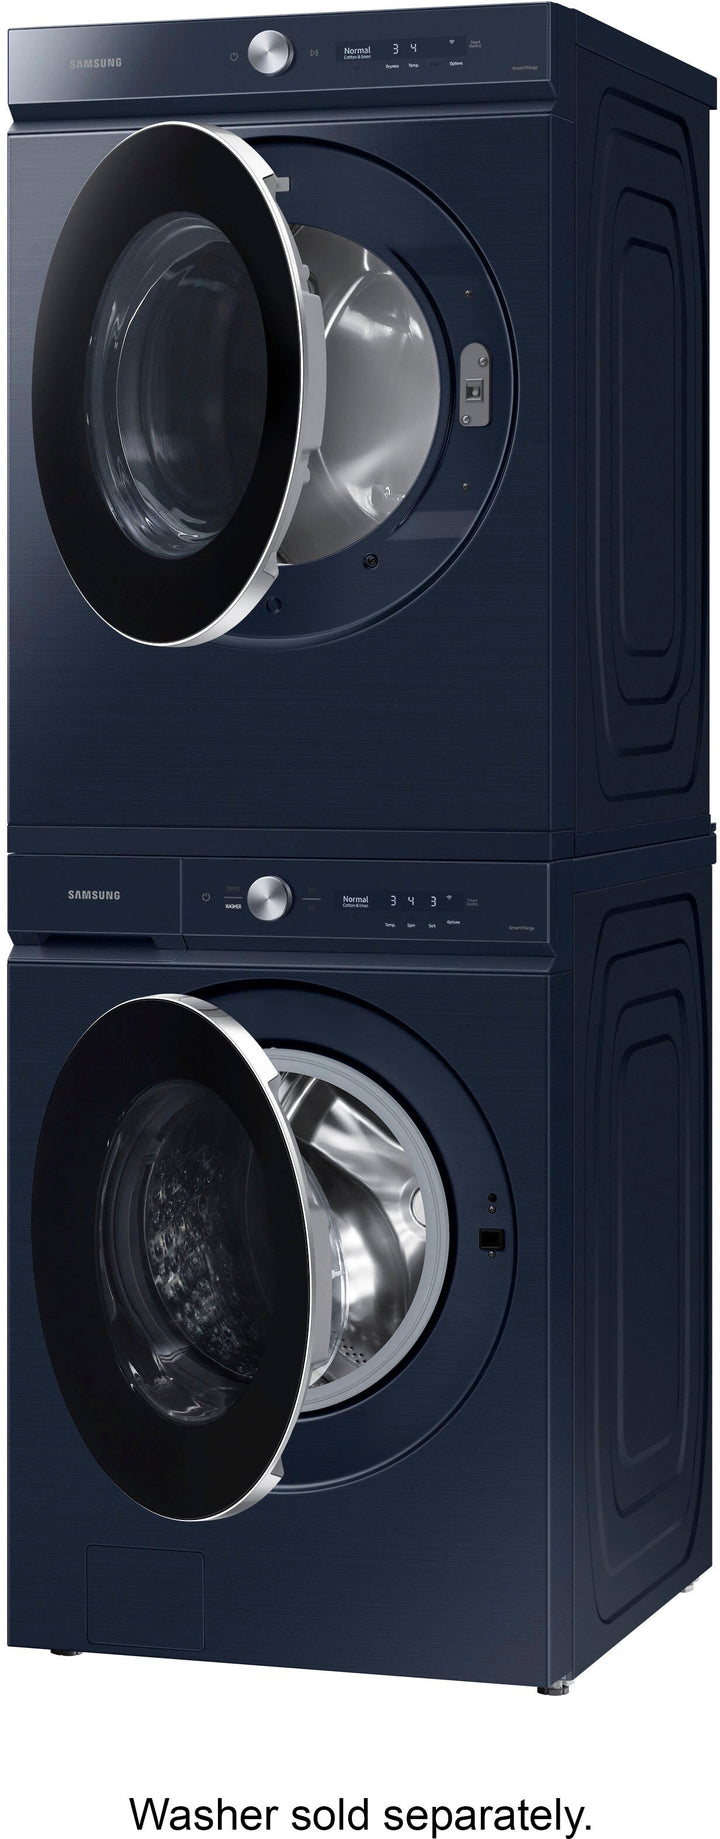 Samsung - Bespoke 7.6 cu. ft. Ultra Capacity Gas Dryer with AI Optimal Dry and Super Speed Dry - Brushed navy_8